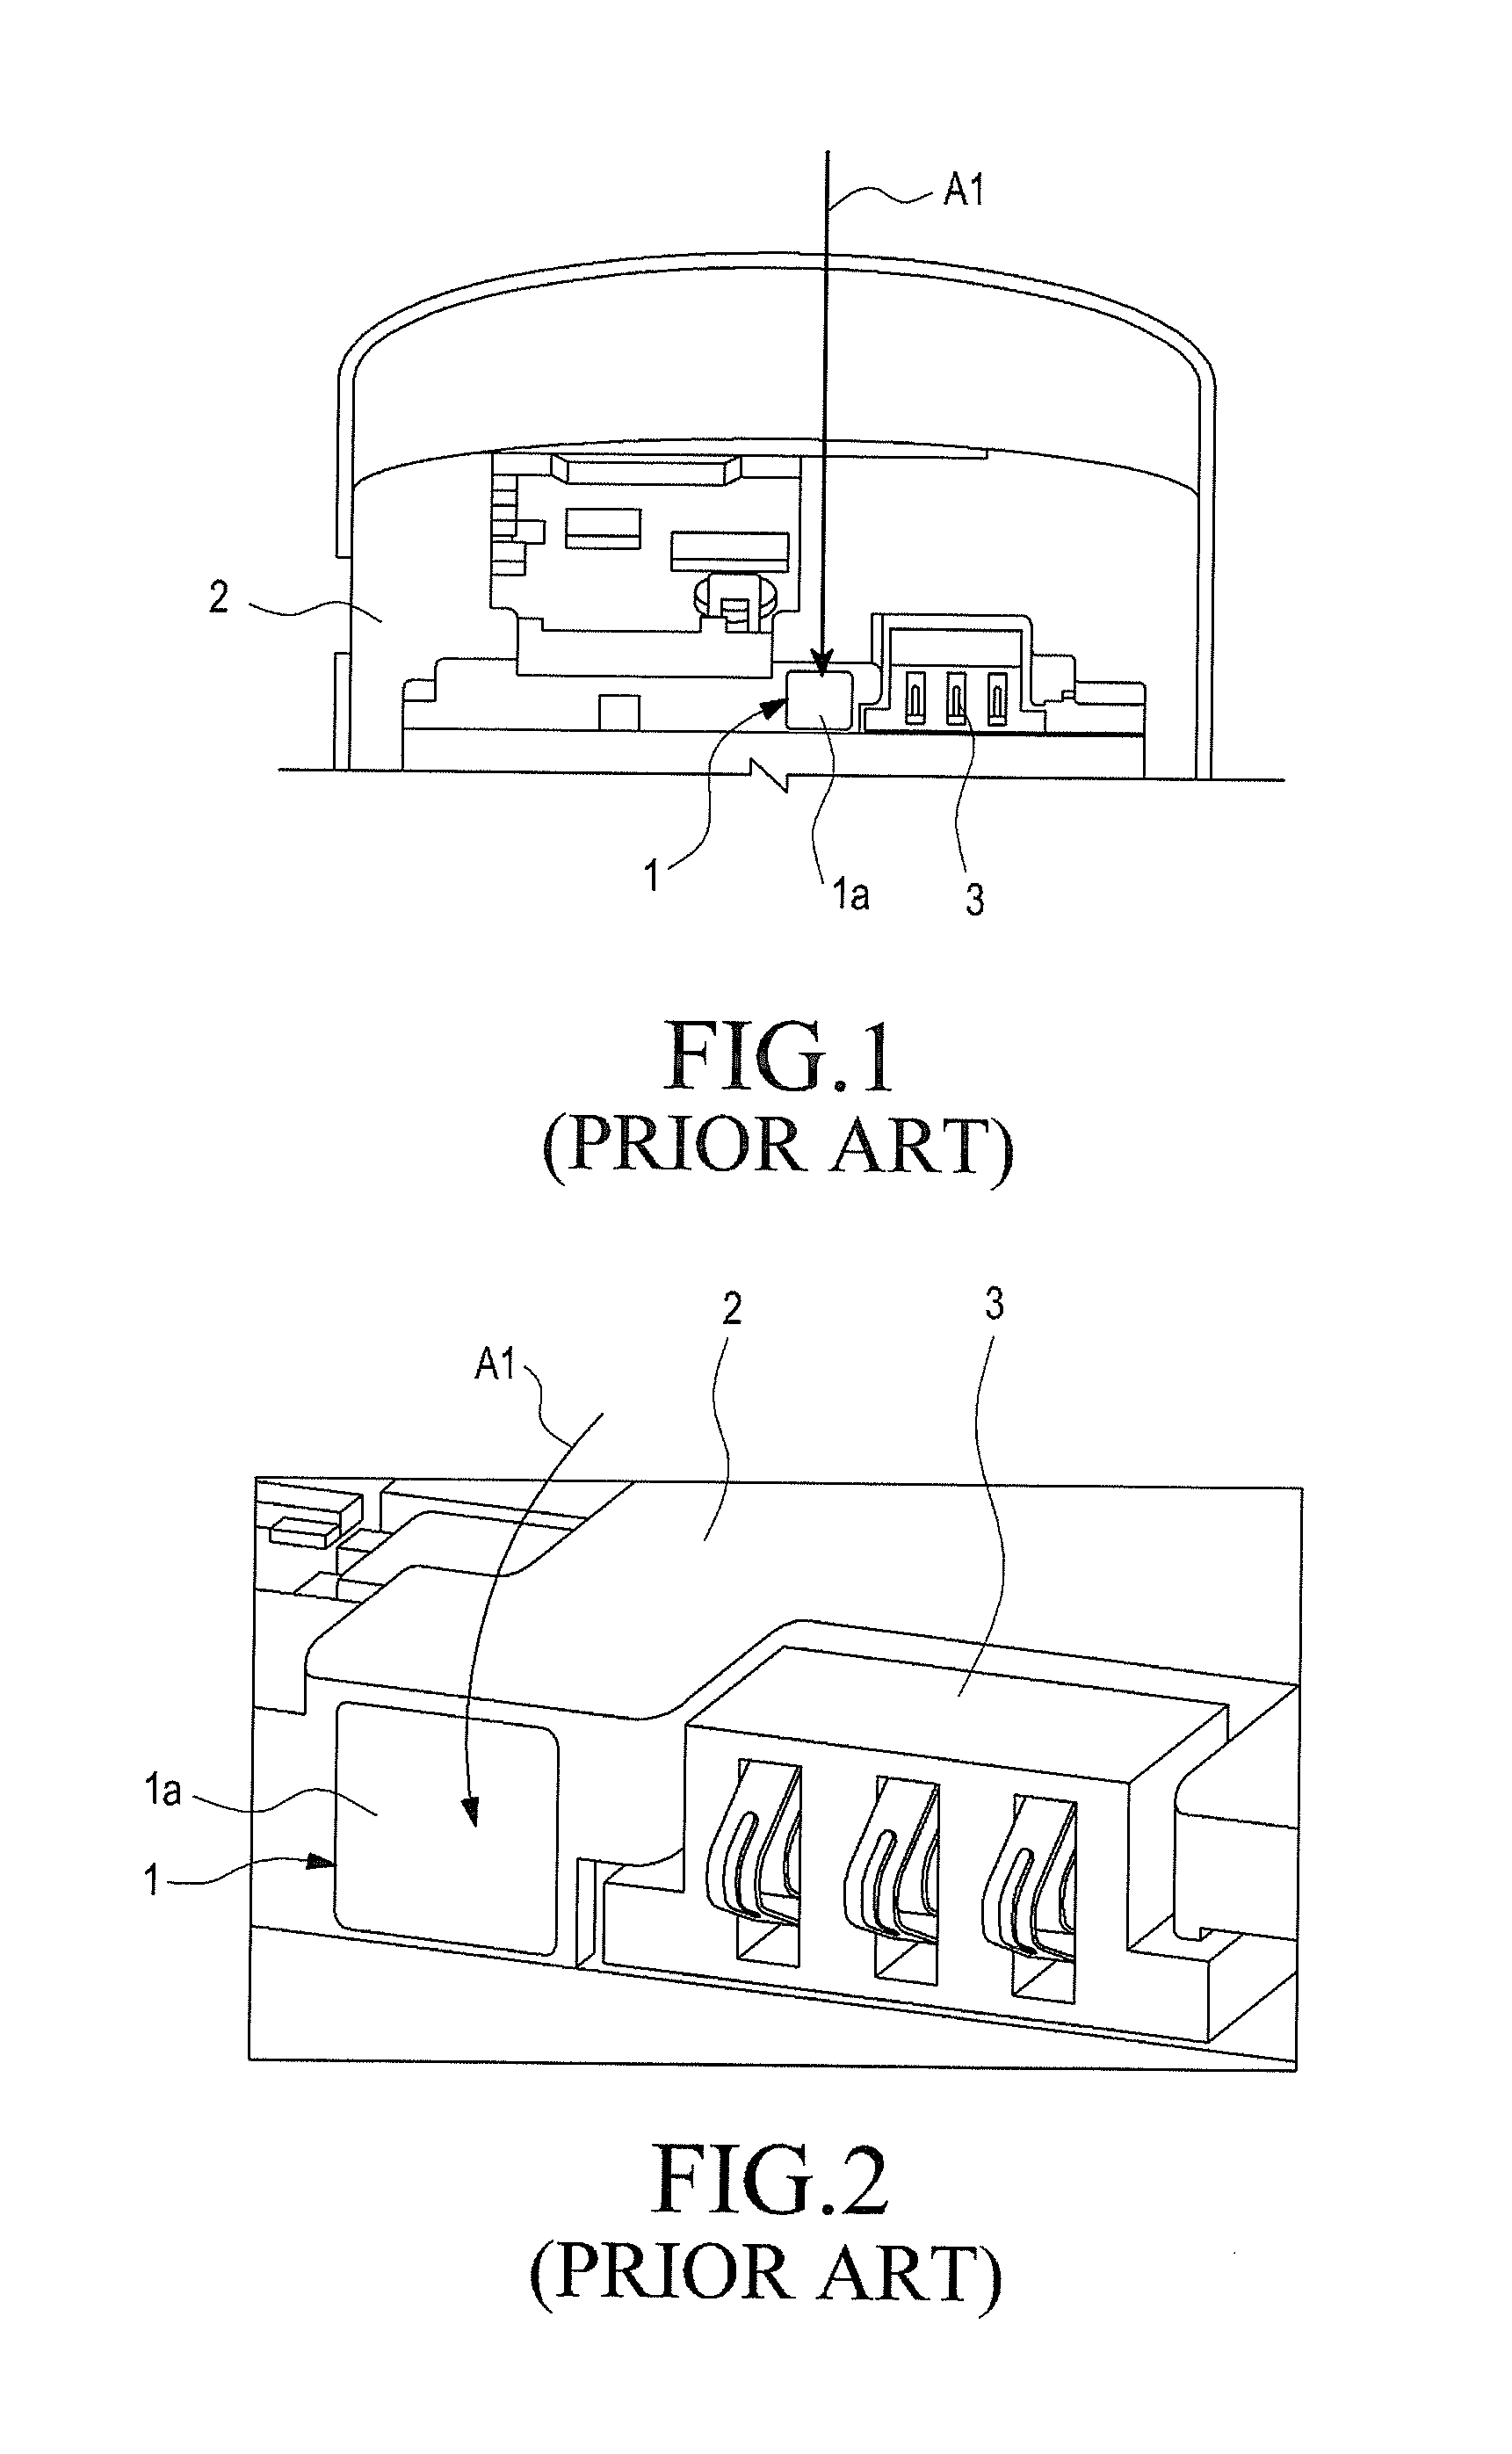 Wet-label device for electronic device